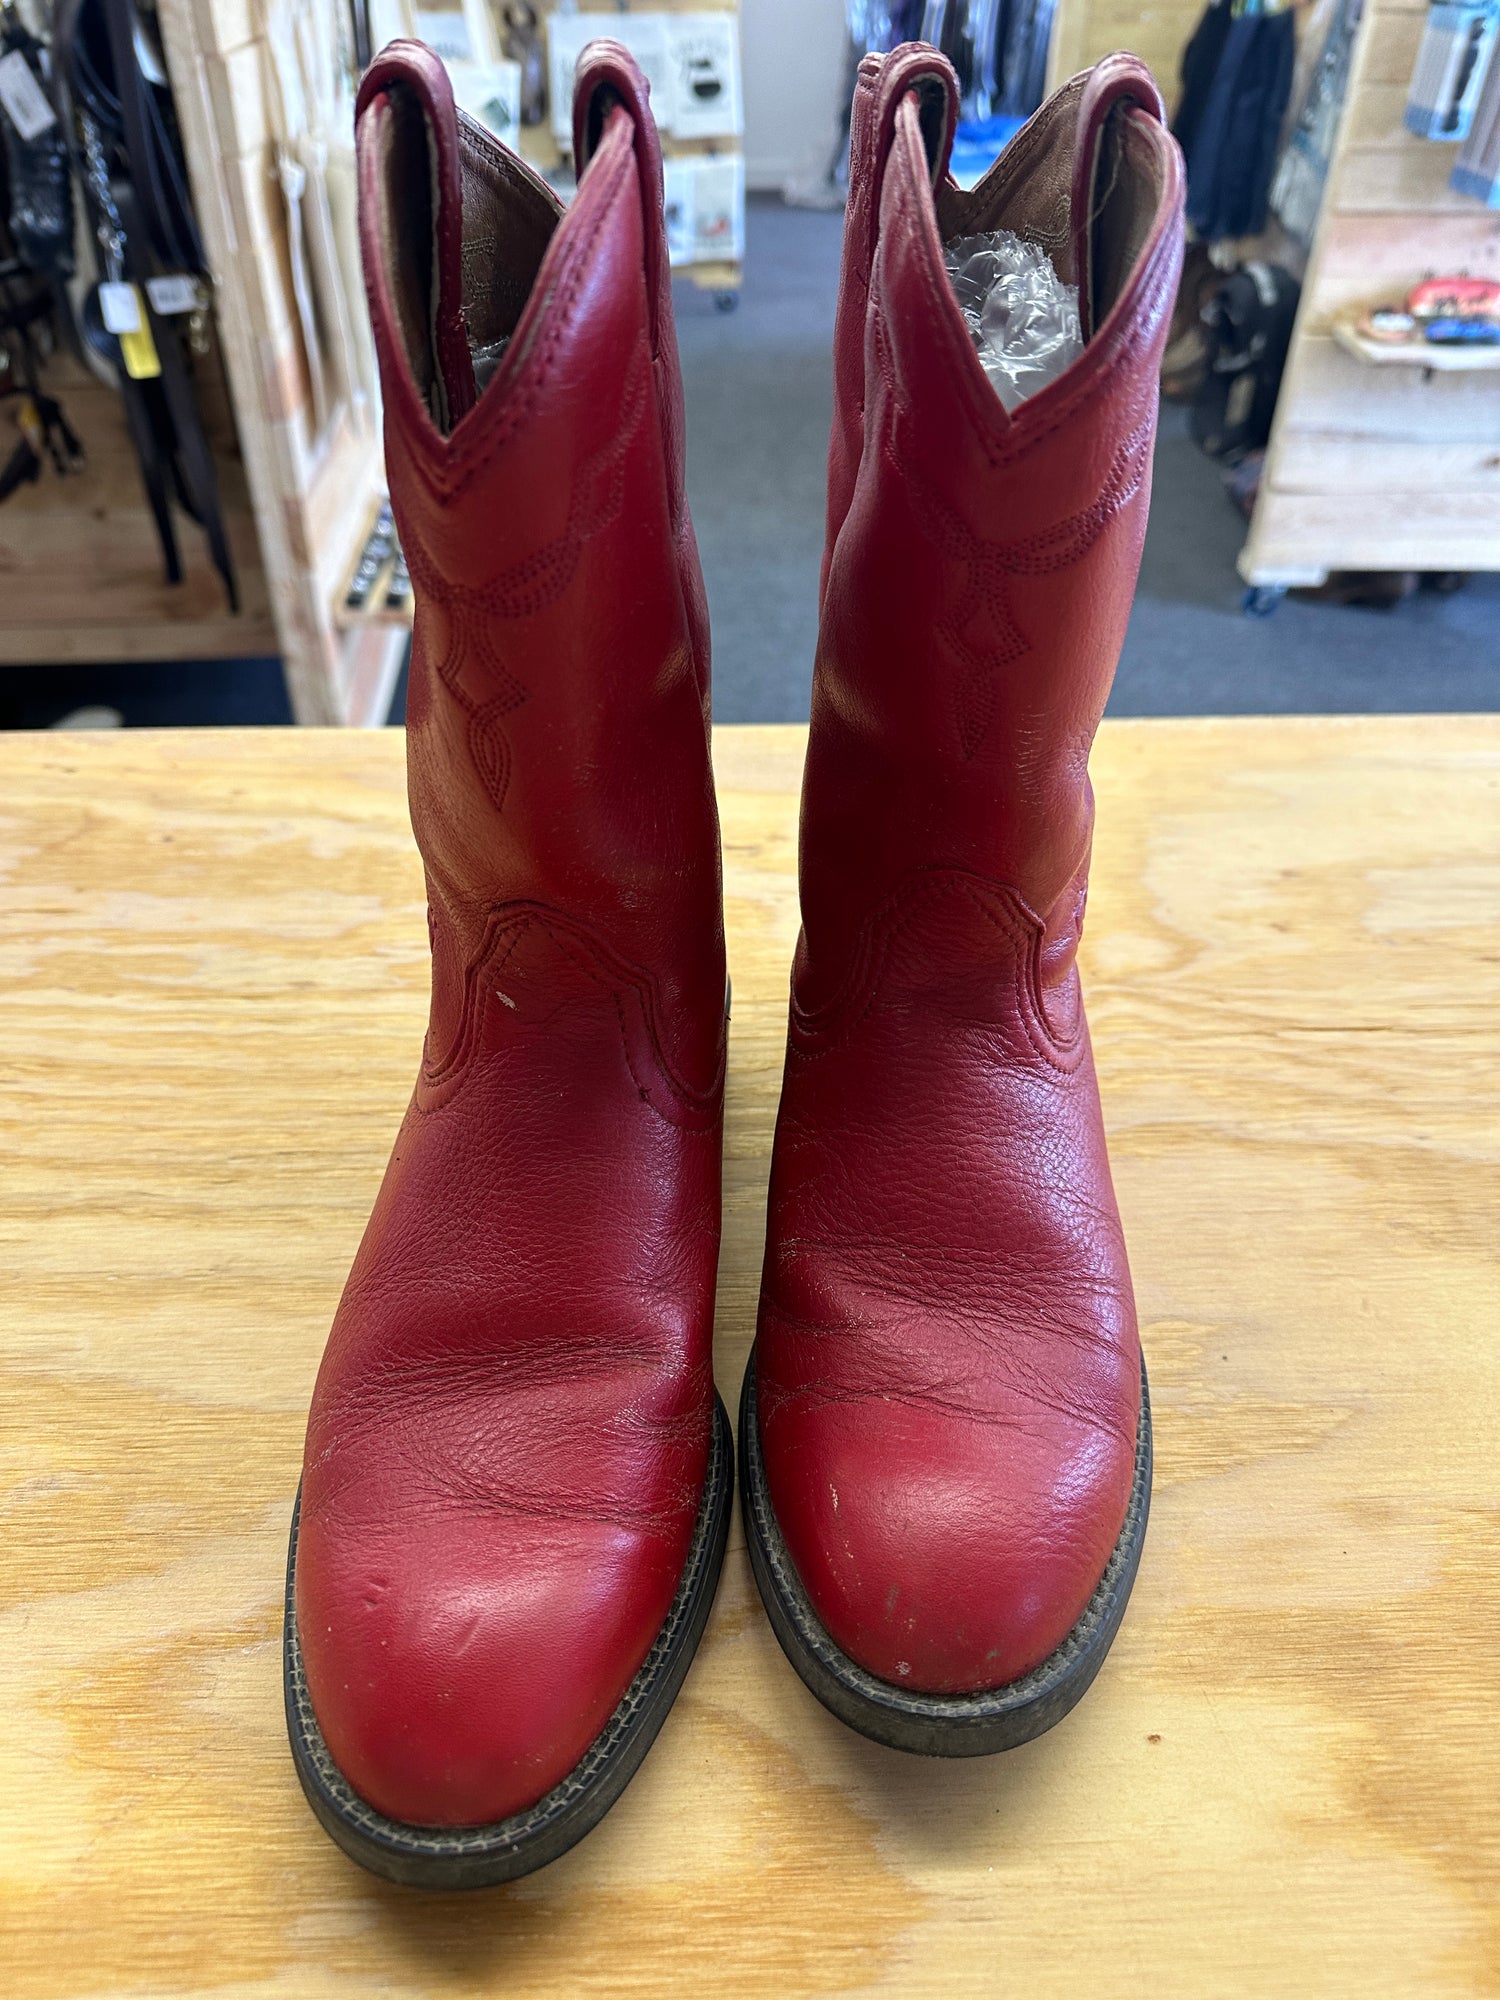 Women's Cowgirl Boots - Red Ariat Size 9